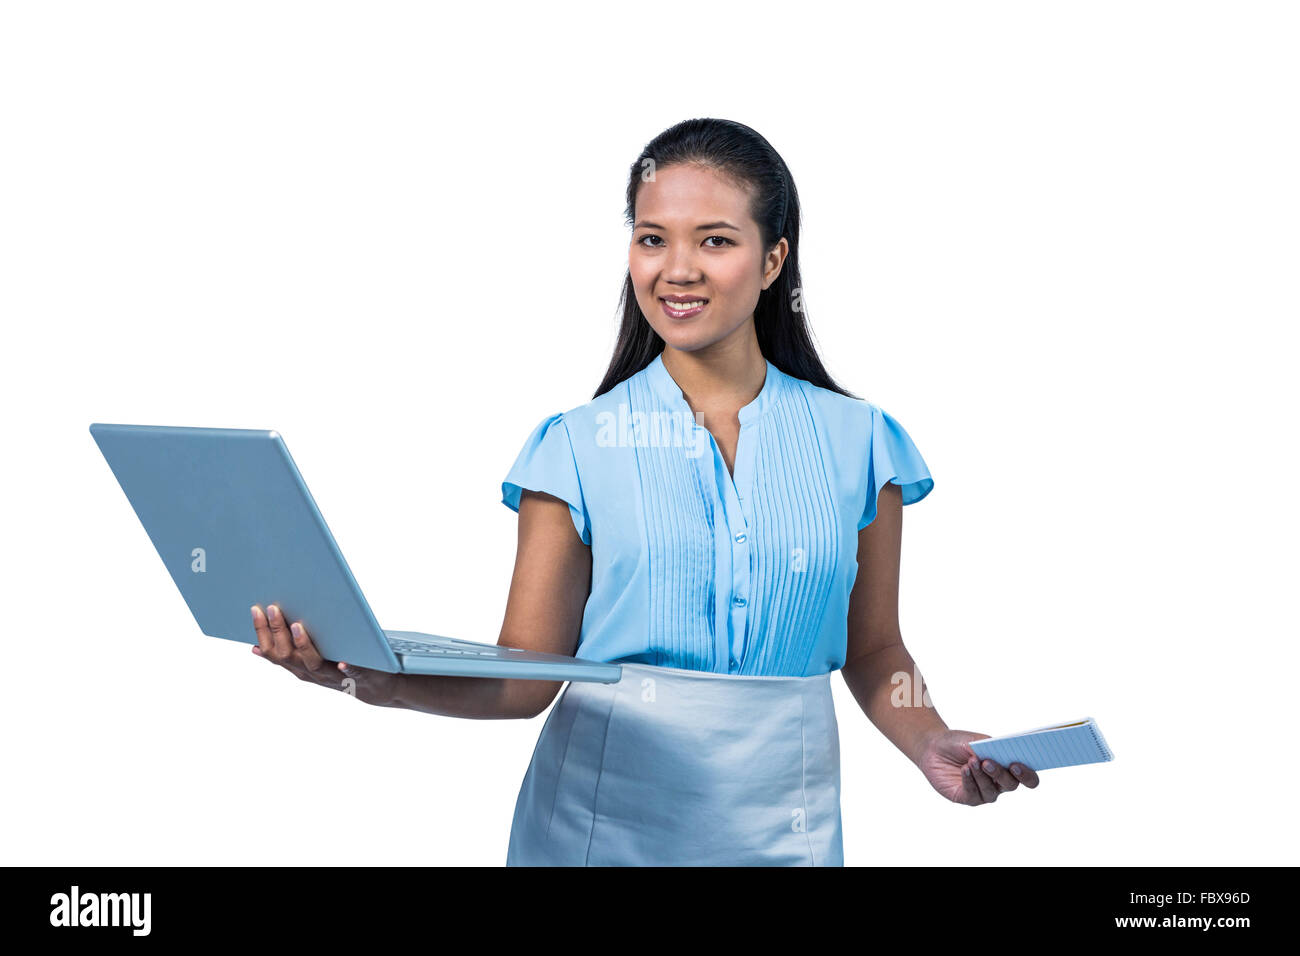 Smiling businesswoman holding smartphone and laptop Stock Photo